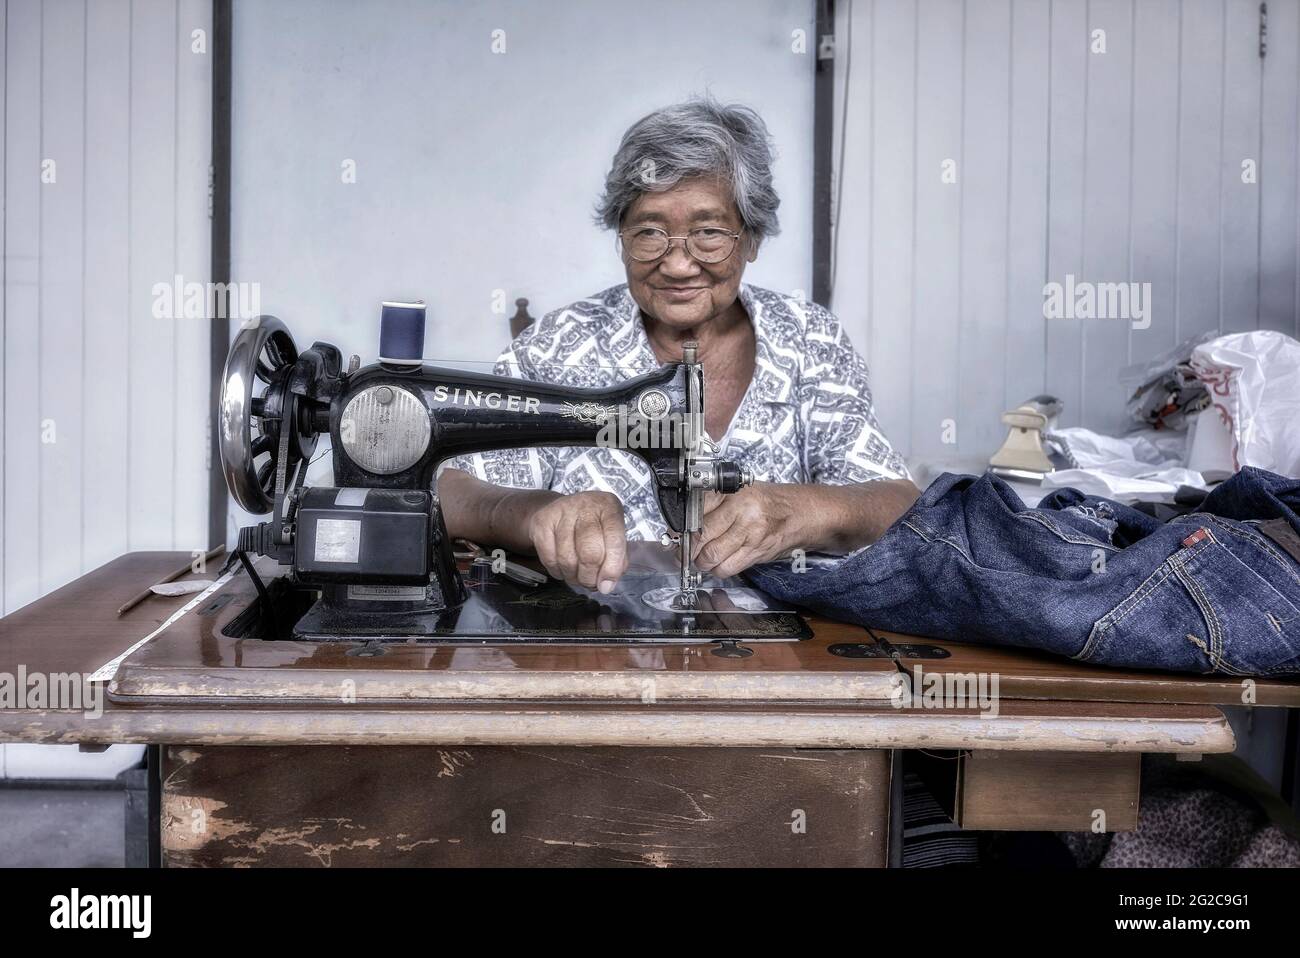 Senior woman working. Seamstress rearing clothes using a vintage singer sewing machine. Thailand Southeast Asia Stock Photo